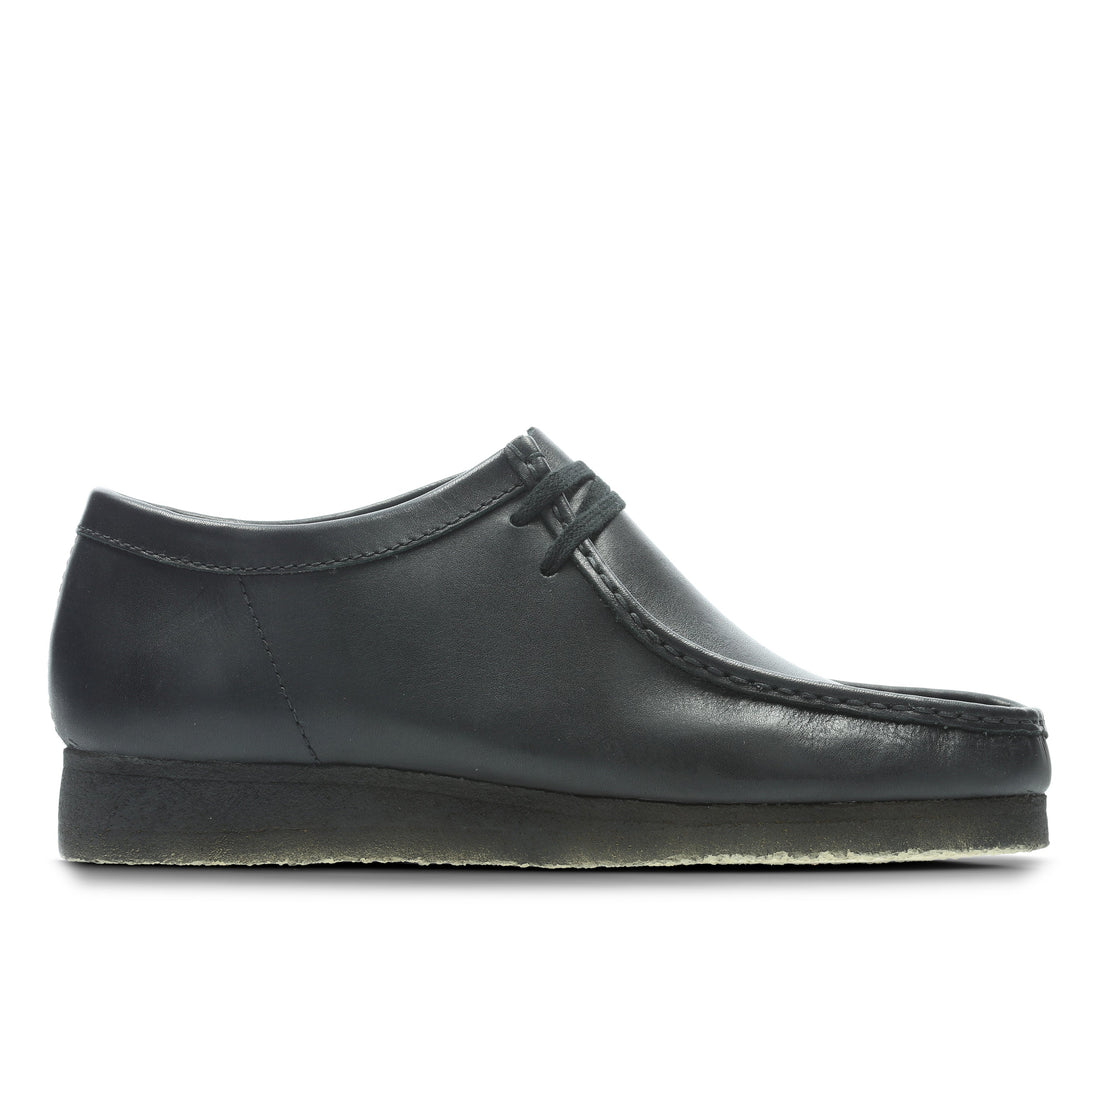 CLARKS - WALLABEE - BLACK LEATHER – Augustine Los Angeles